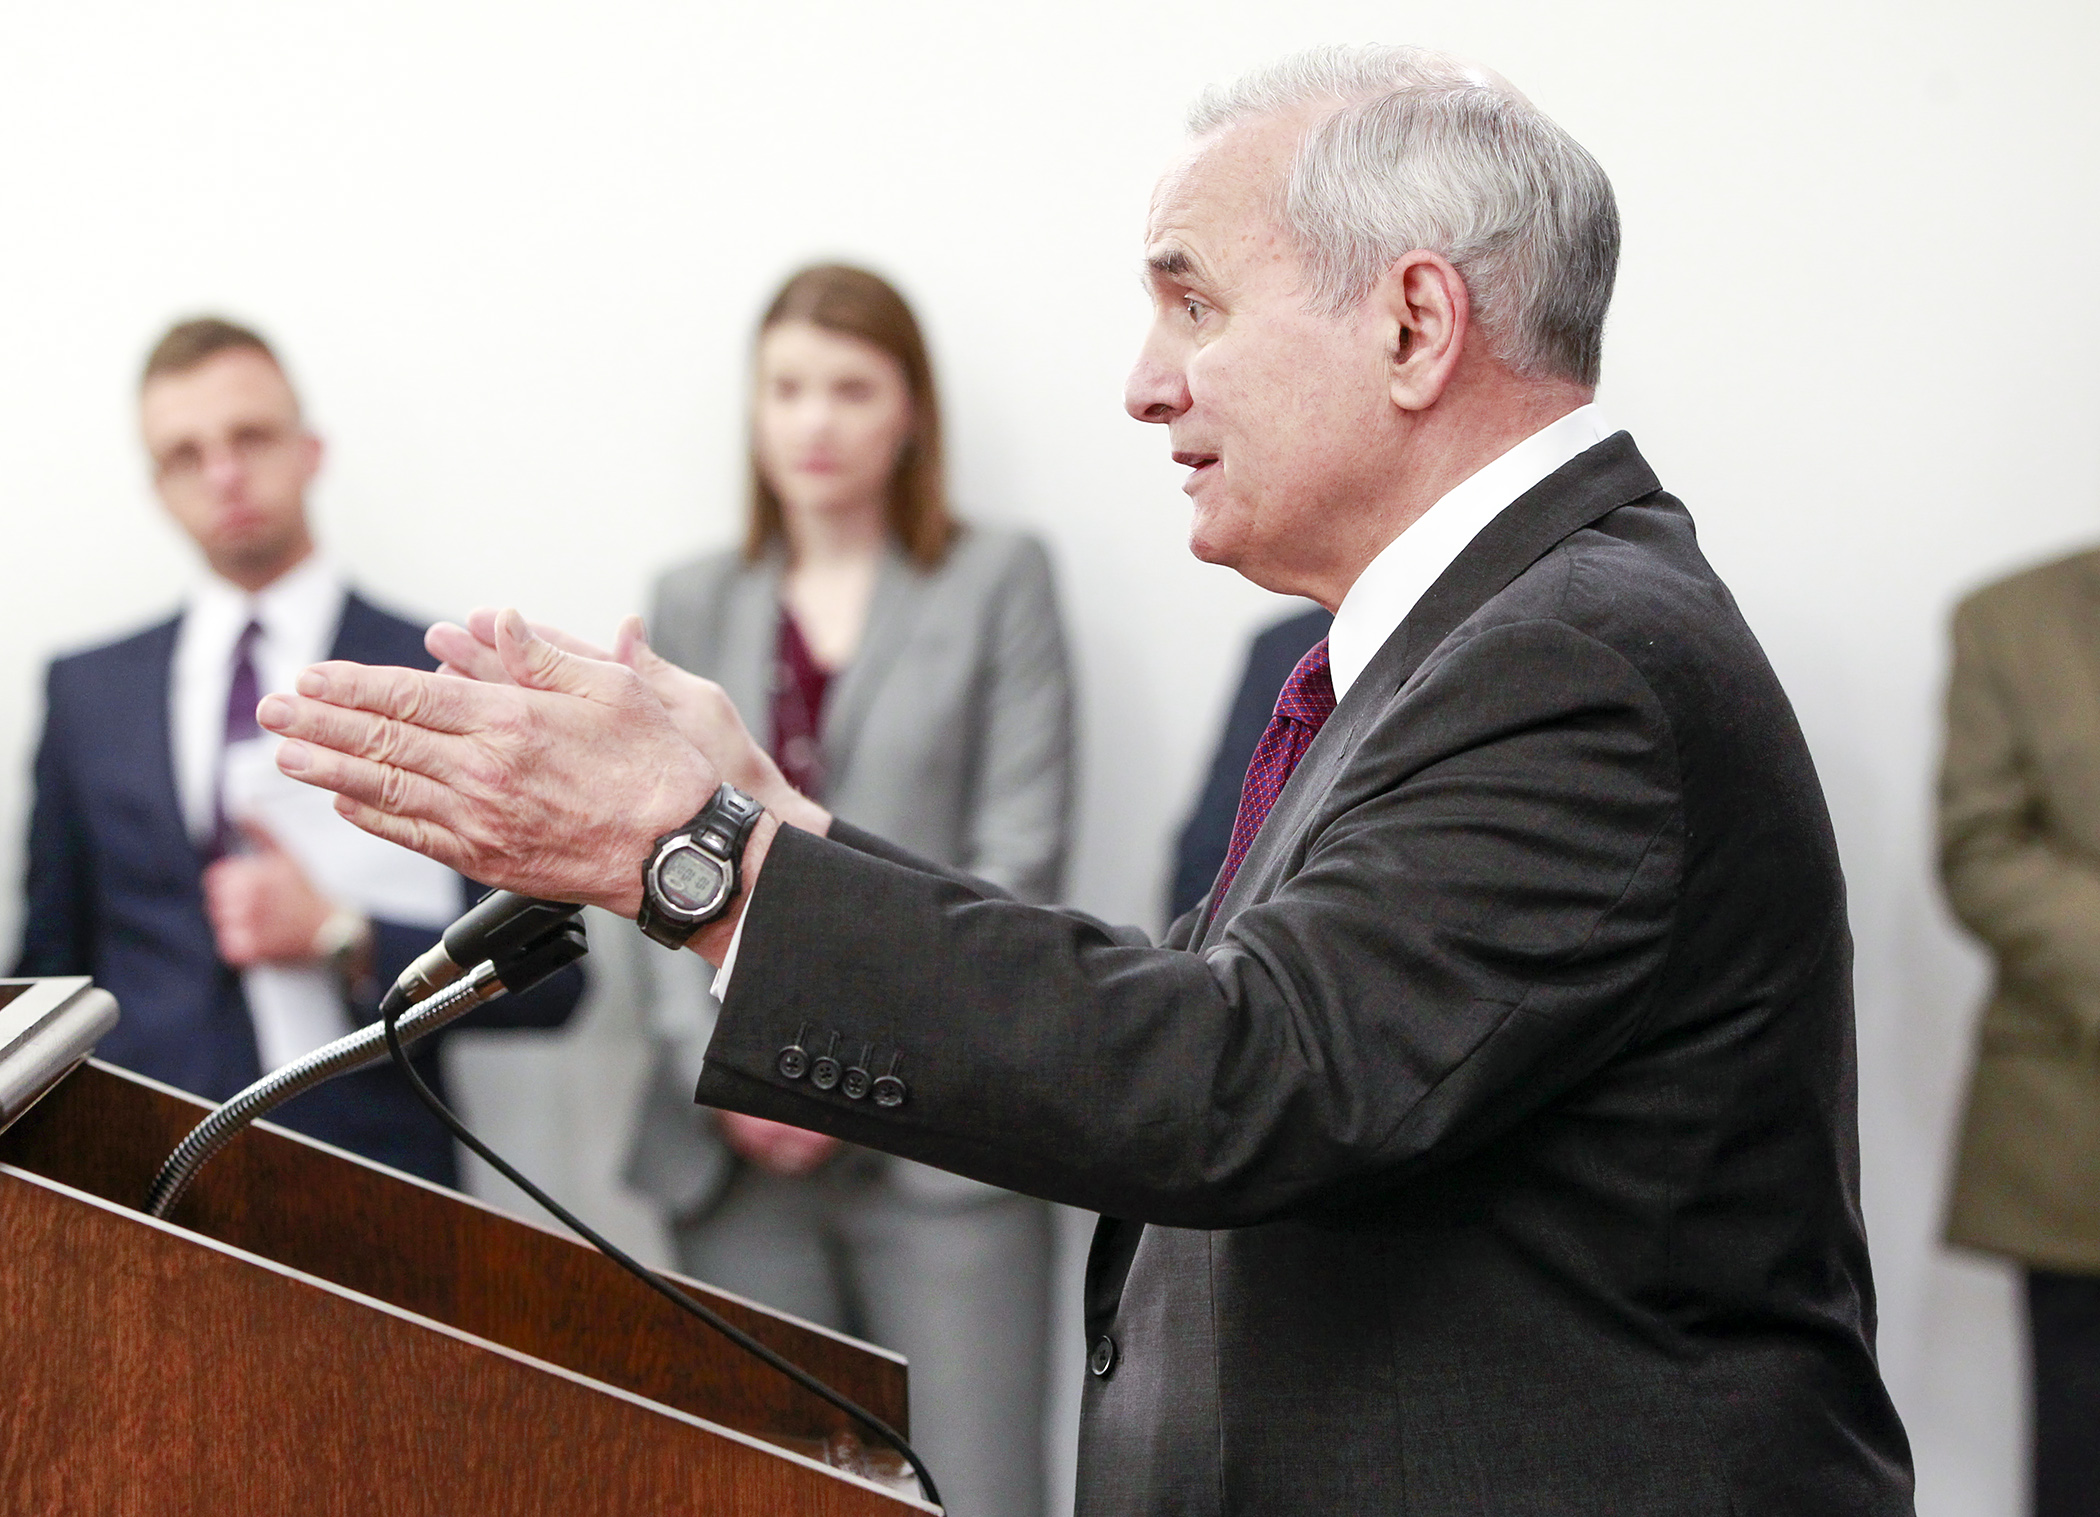 Gov. Mark Dayton on Tuesday asked legislative leaders to work with him to resolve their differences so they can meet in special session to pass new tax and bonding bills. Photo by Paul Battaglia